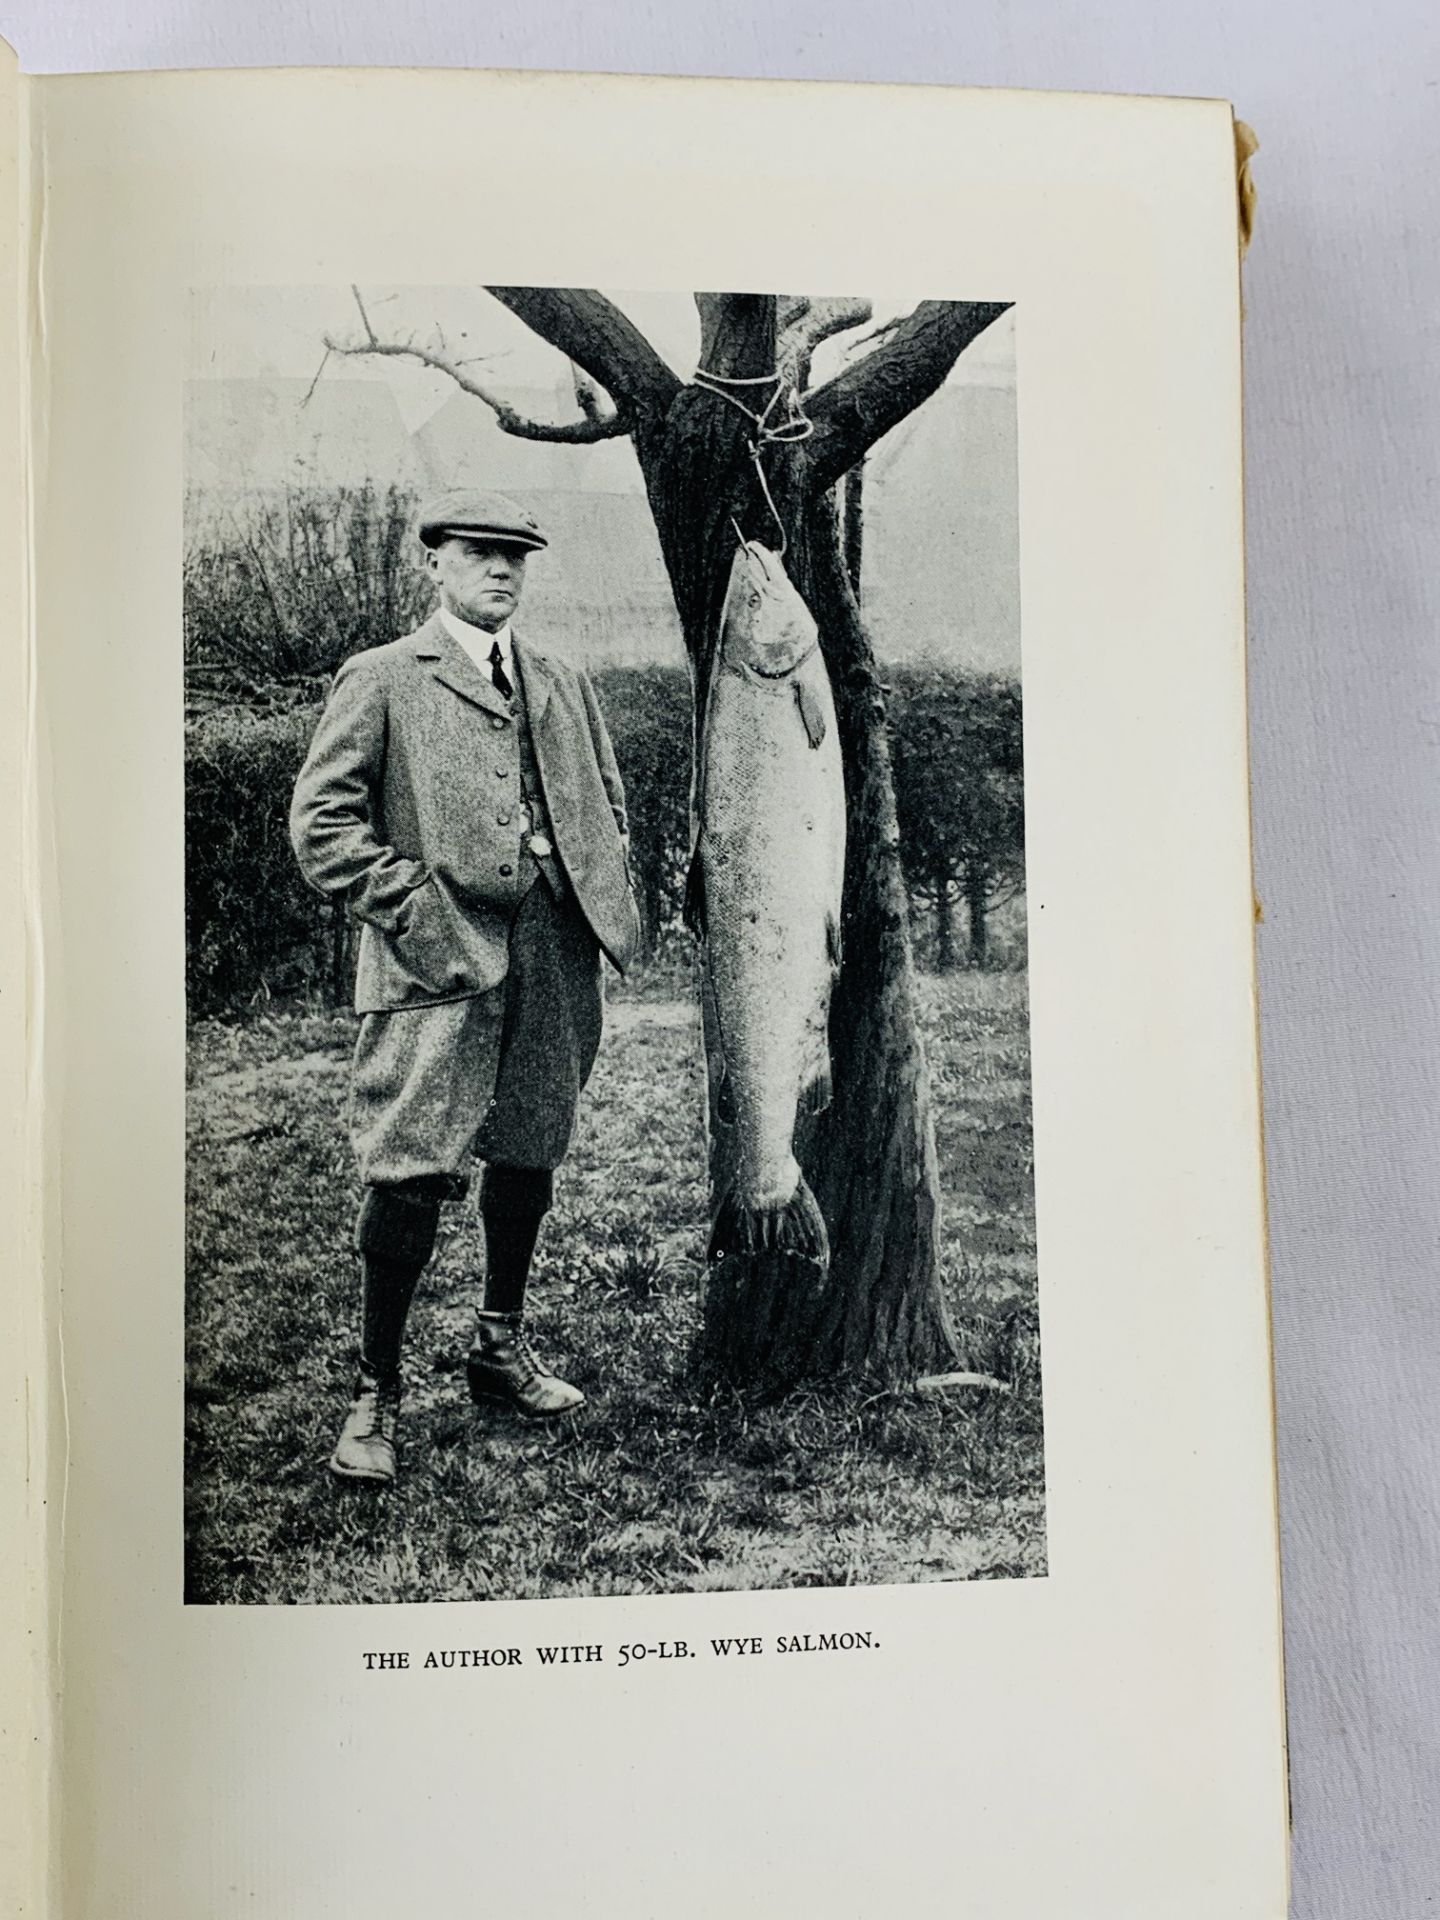 Fishing for Salmon, Practical Modern Methods by Cyril Darby Marson, published 1929. - Image 2 of 3